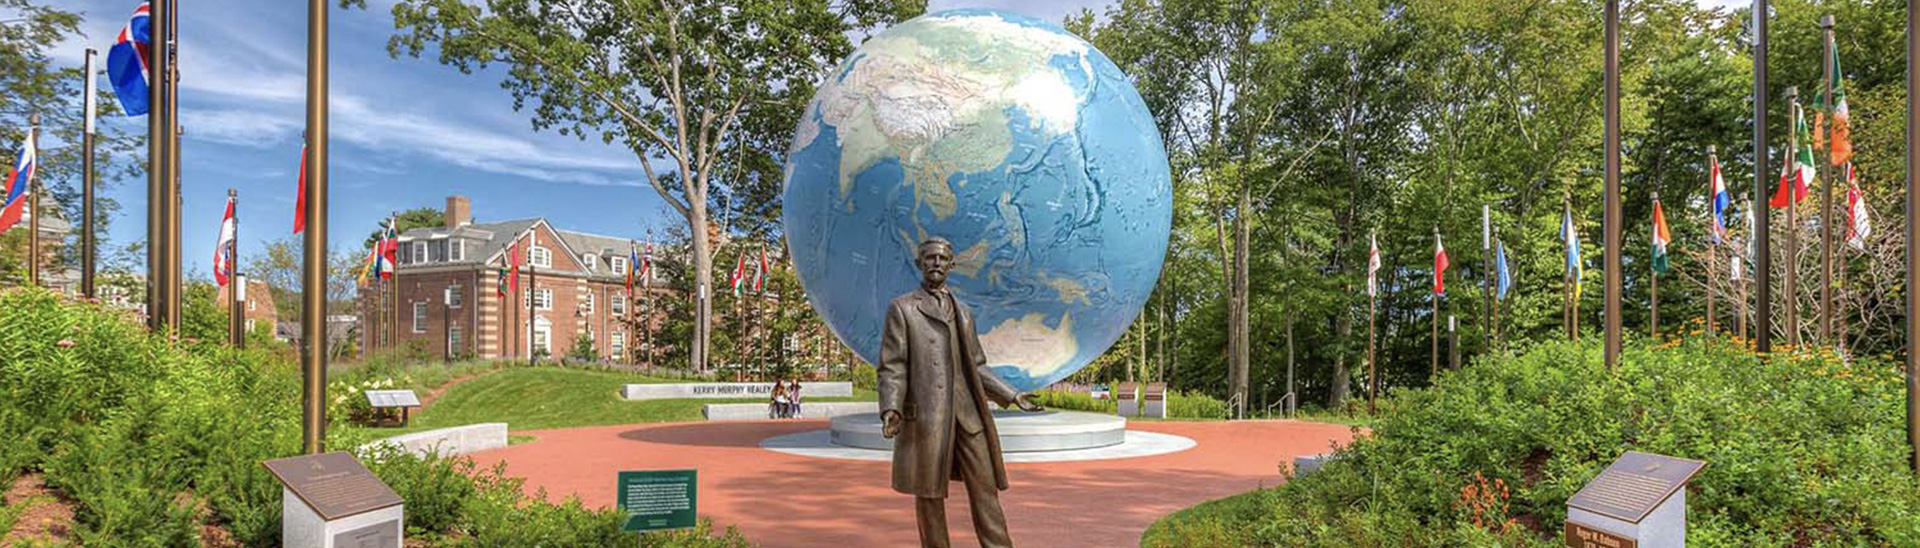 Babson Globe and statue